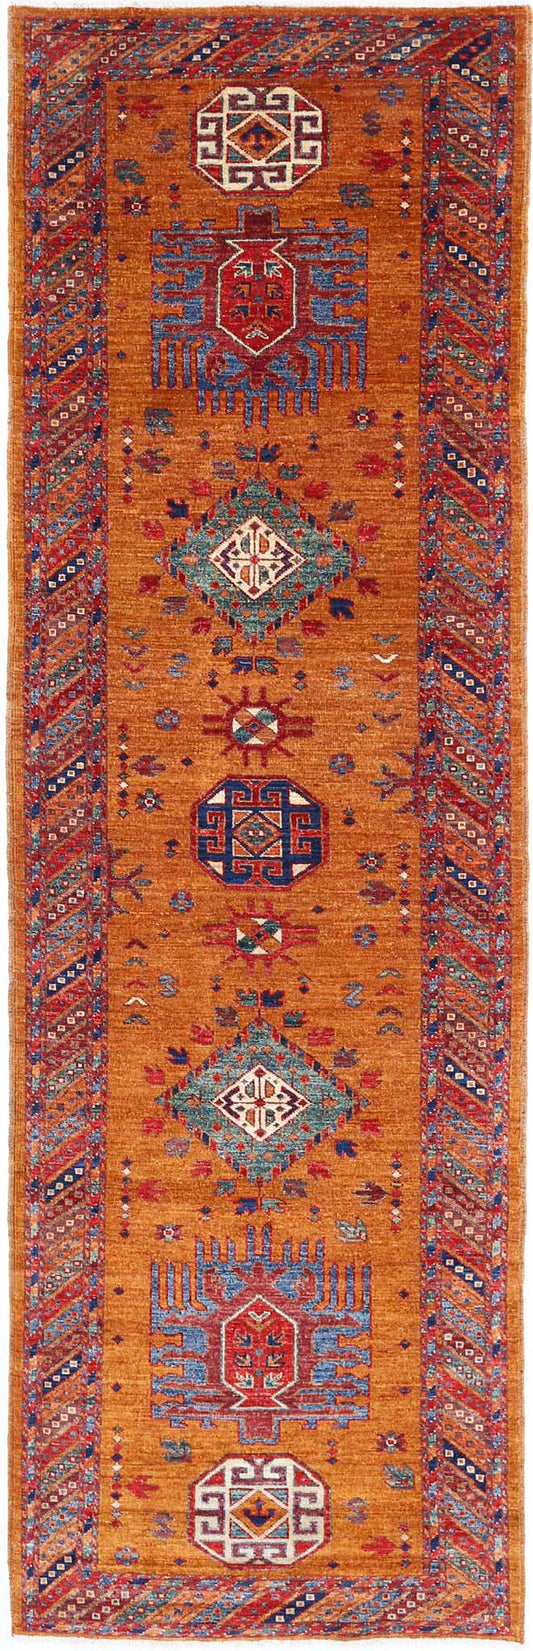 Tribal Hand Knotted Humna Humna Wool Rug of Size 2'10'' X 9'8'' in Gold and Multi Colors - Made in Afghanistan